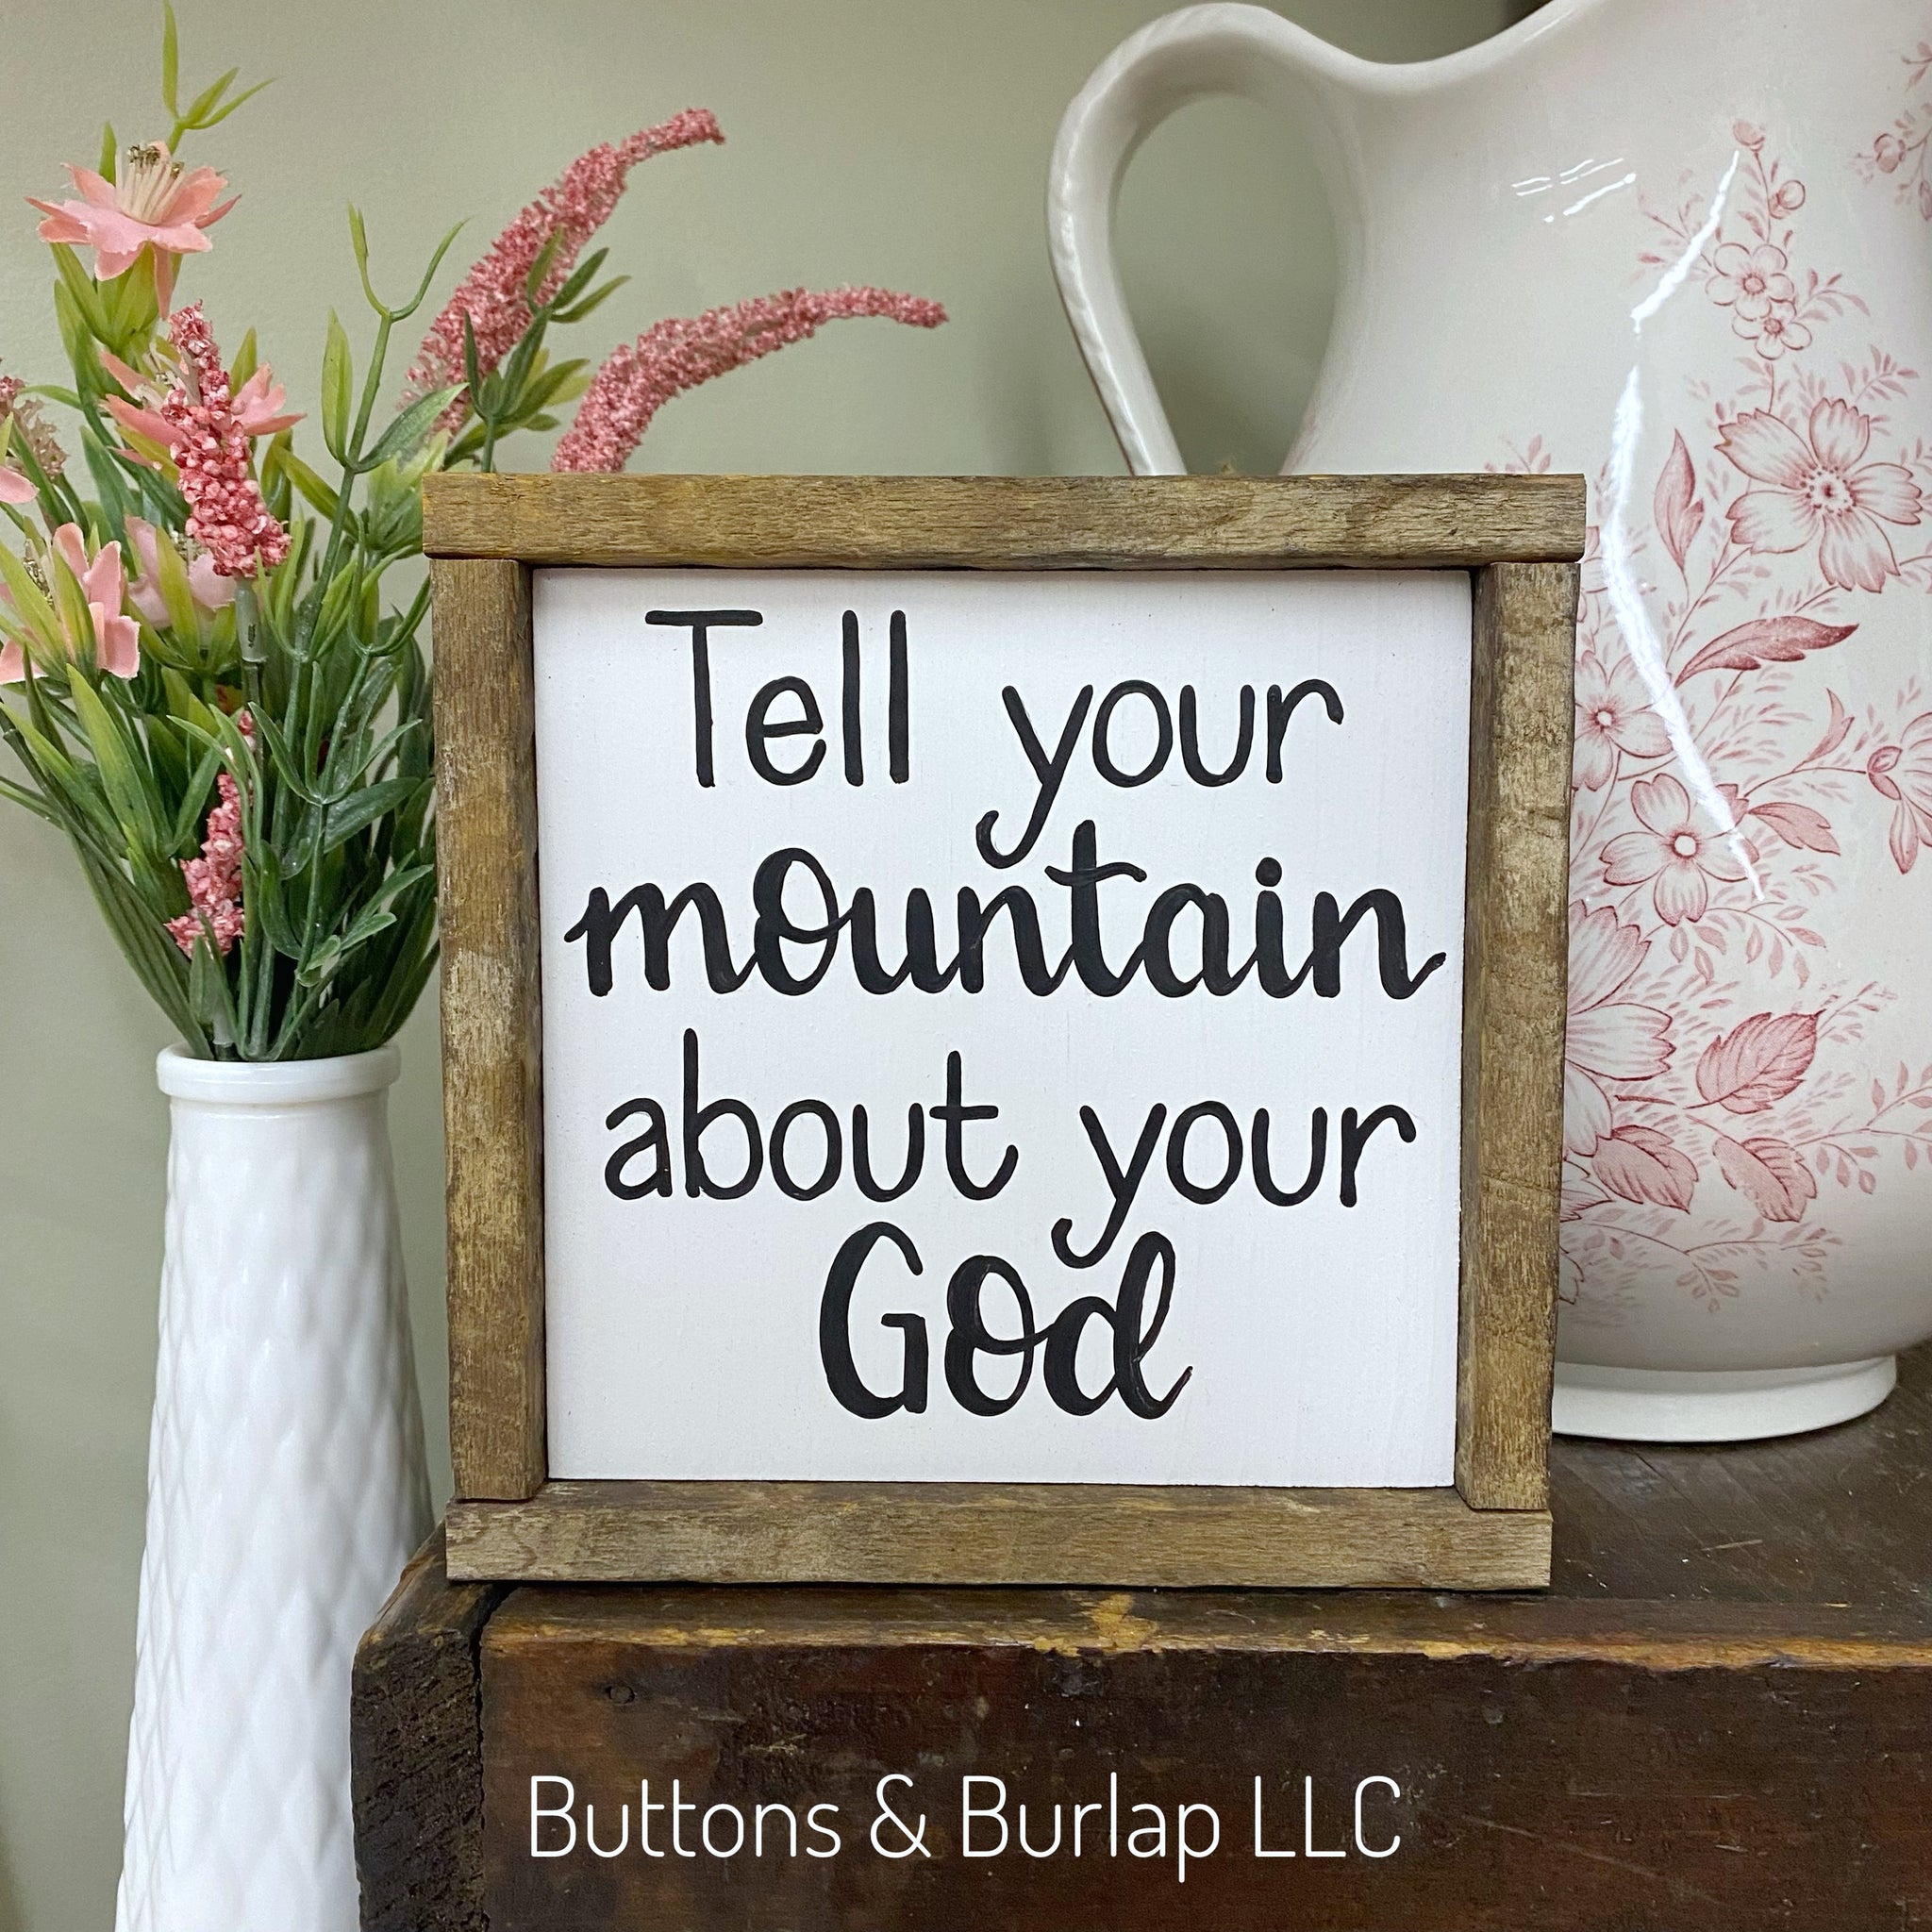 Tell your mountain about your God